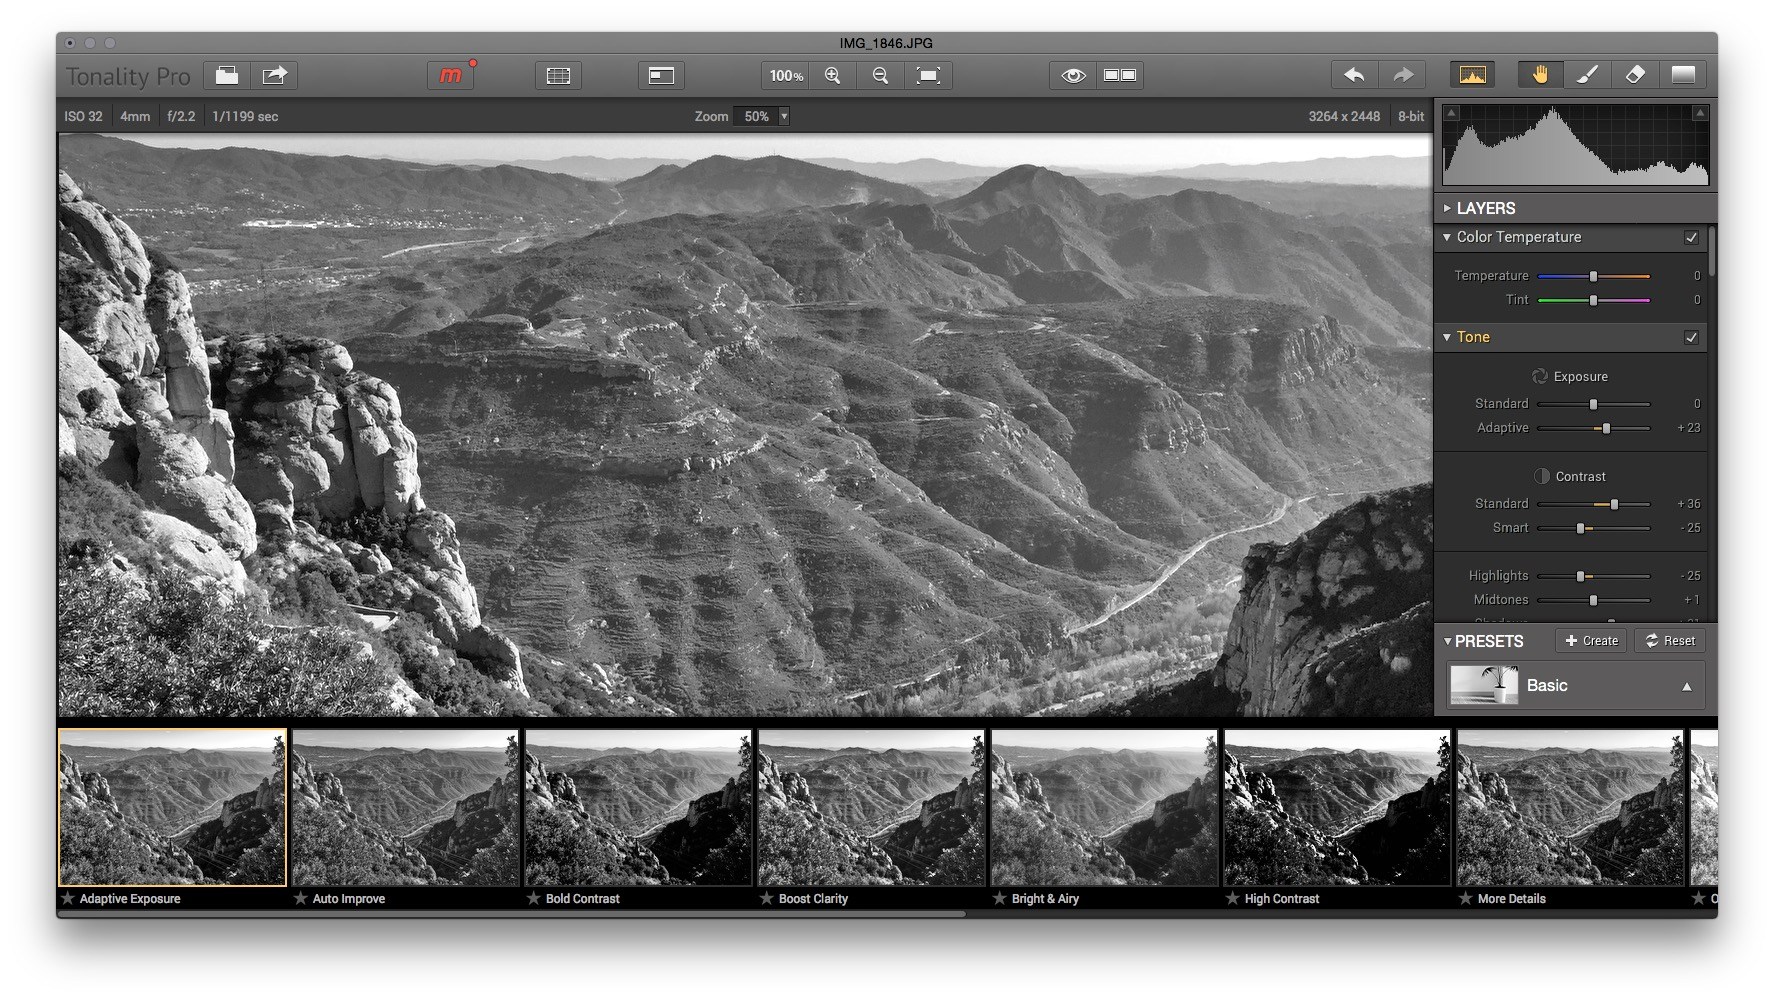 adobe what is the latest version of adobe camera raw for mac high sierra 10.13.1